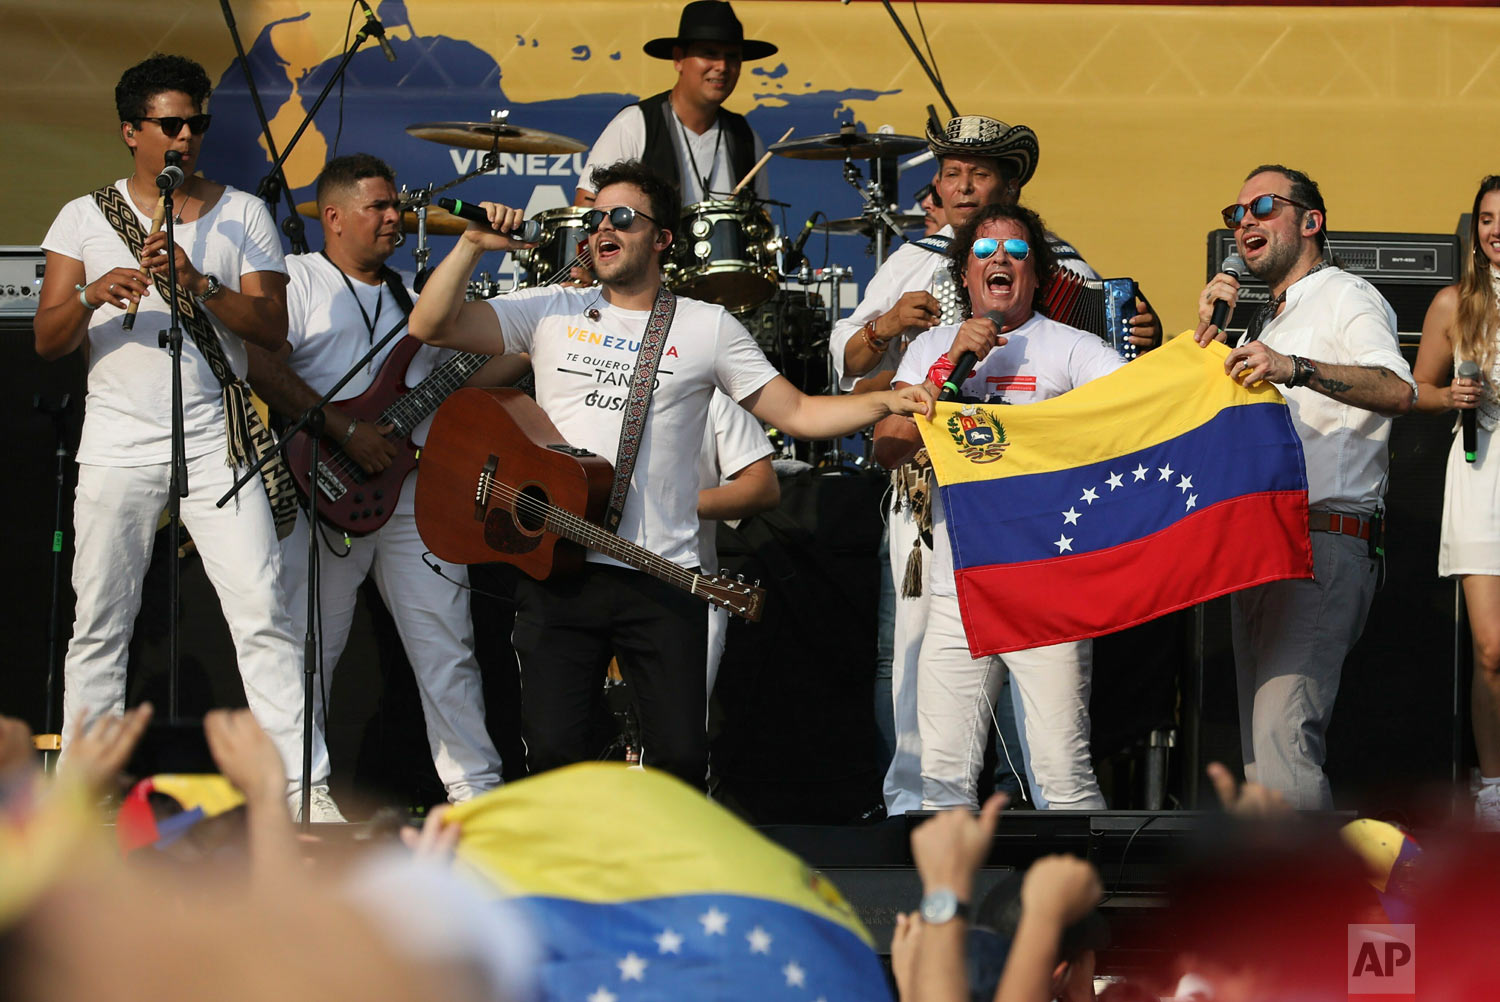  Gusi, left center, and Santiago Cruz, far right, hold a Venezuelan national flag as they perform with Carlos Vives at the Live Aid Venezuela concert at the Tienditas International Bridge on the outskirts of Cucuta, Colombia, Friday, Feb. 22, 2019, o